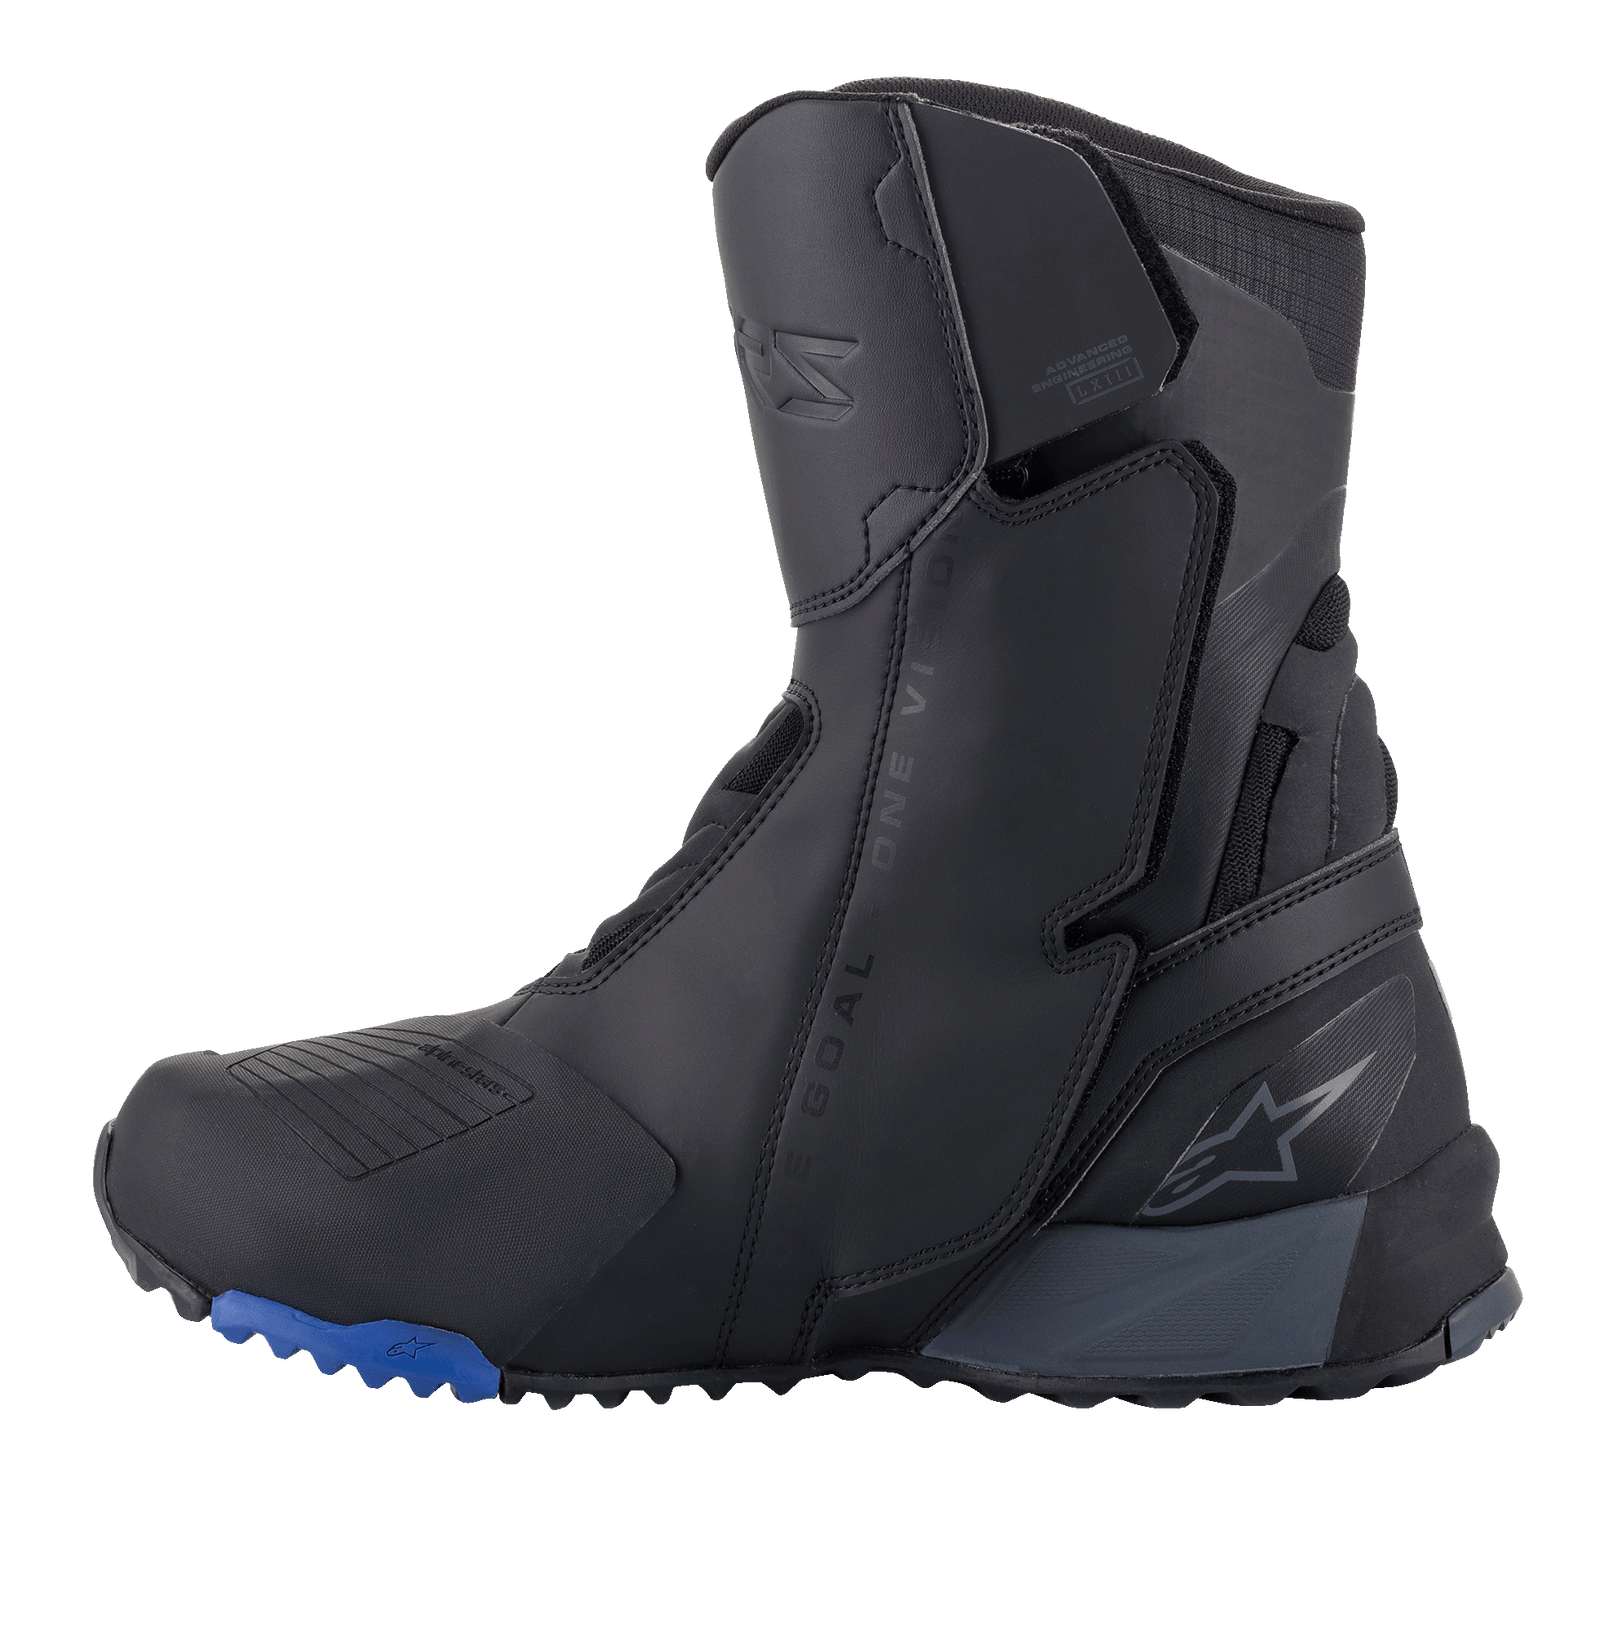 RT-8 GORE-TEX Boots